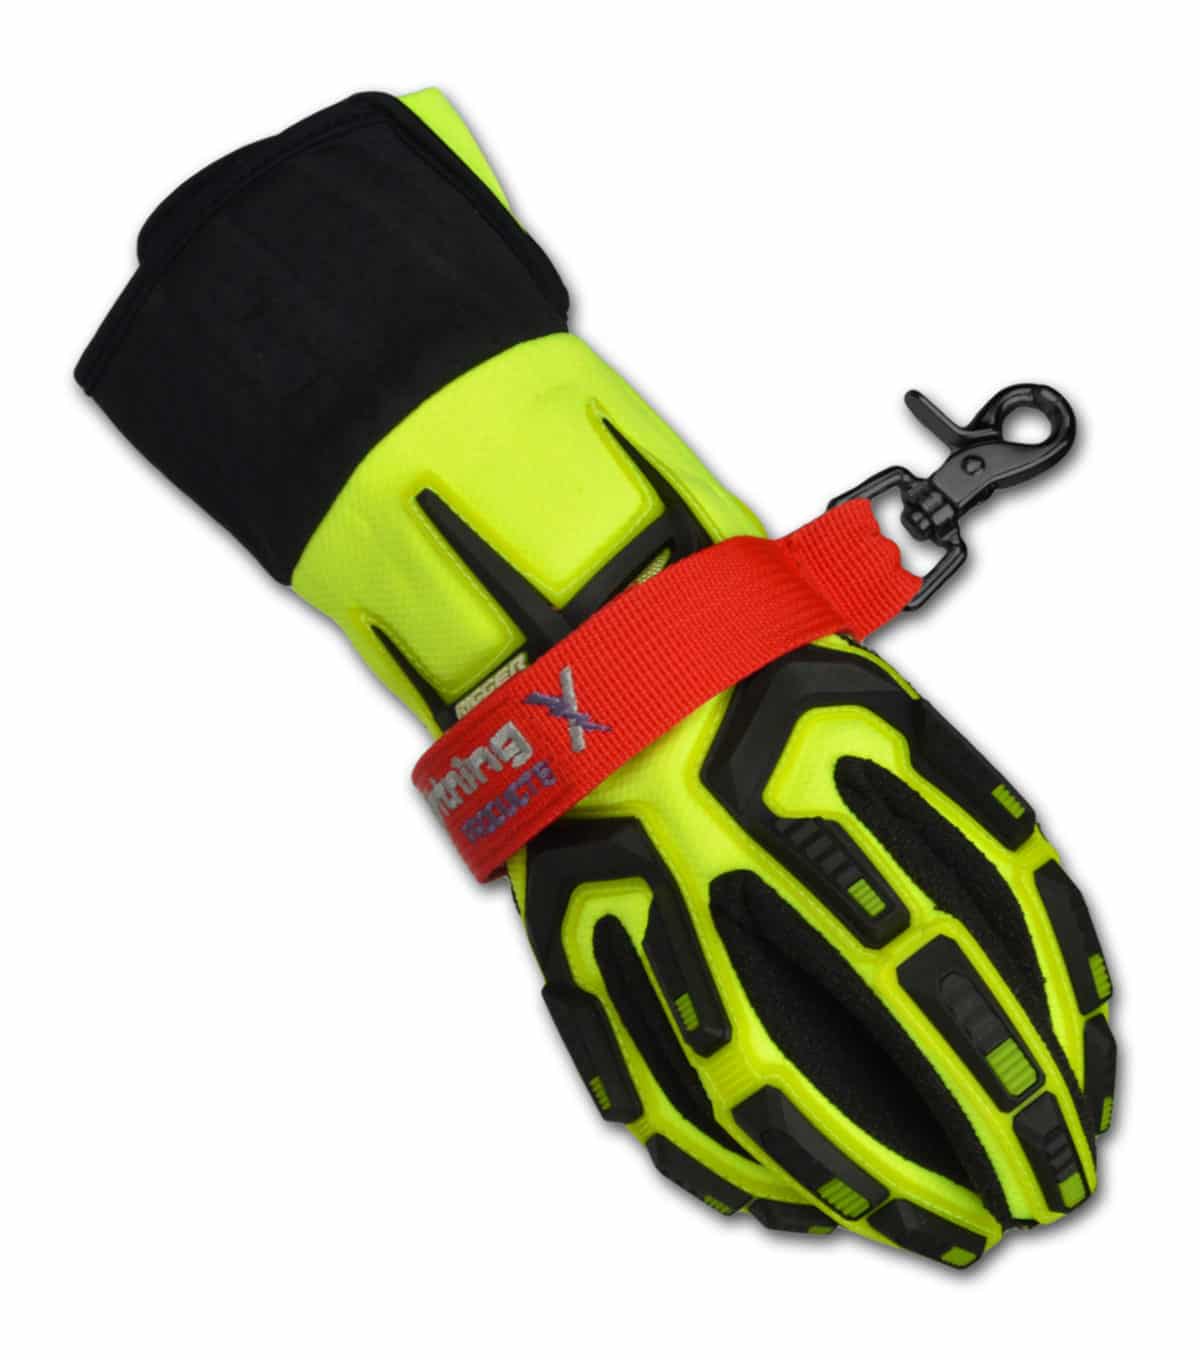 How to fix hook and loop (Velcro) on ski gloves - Free The Powder Gloves